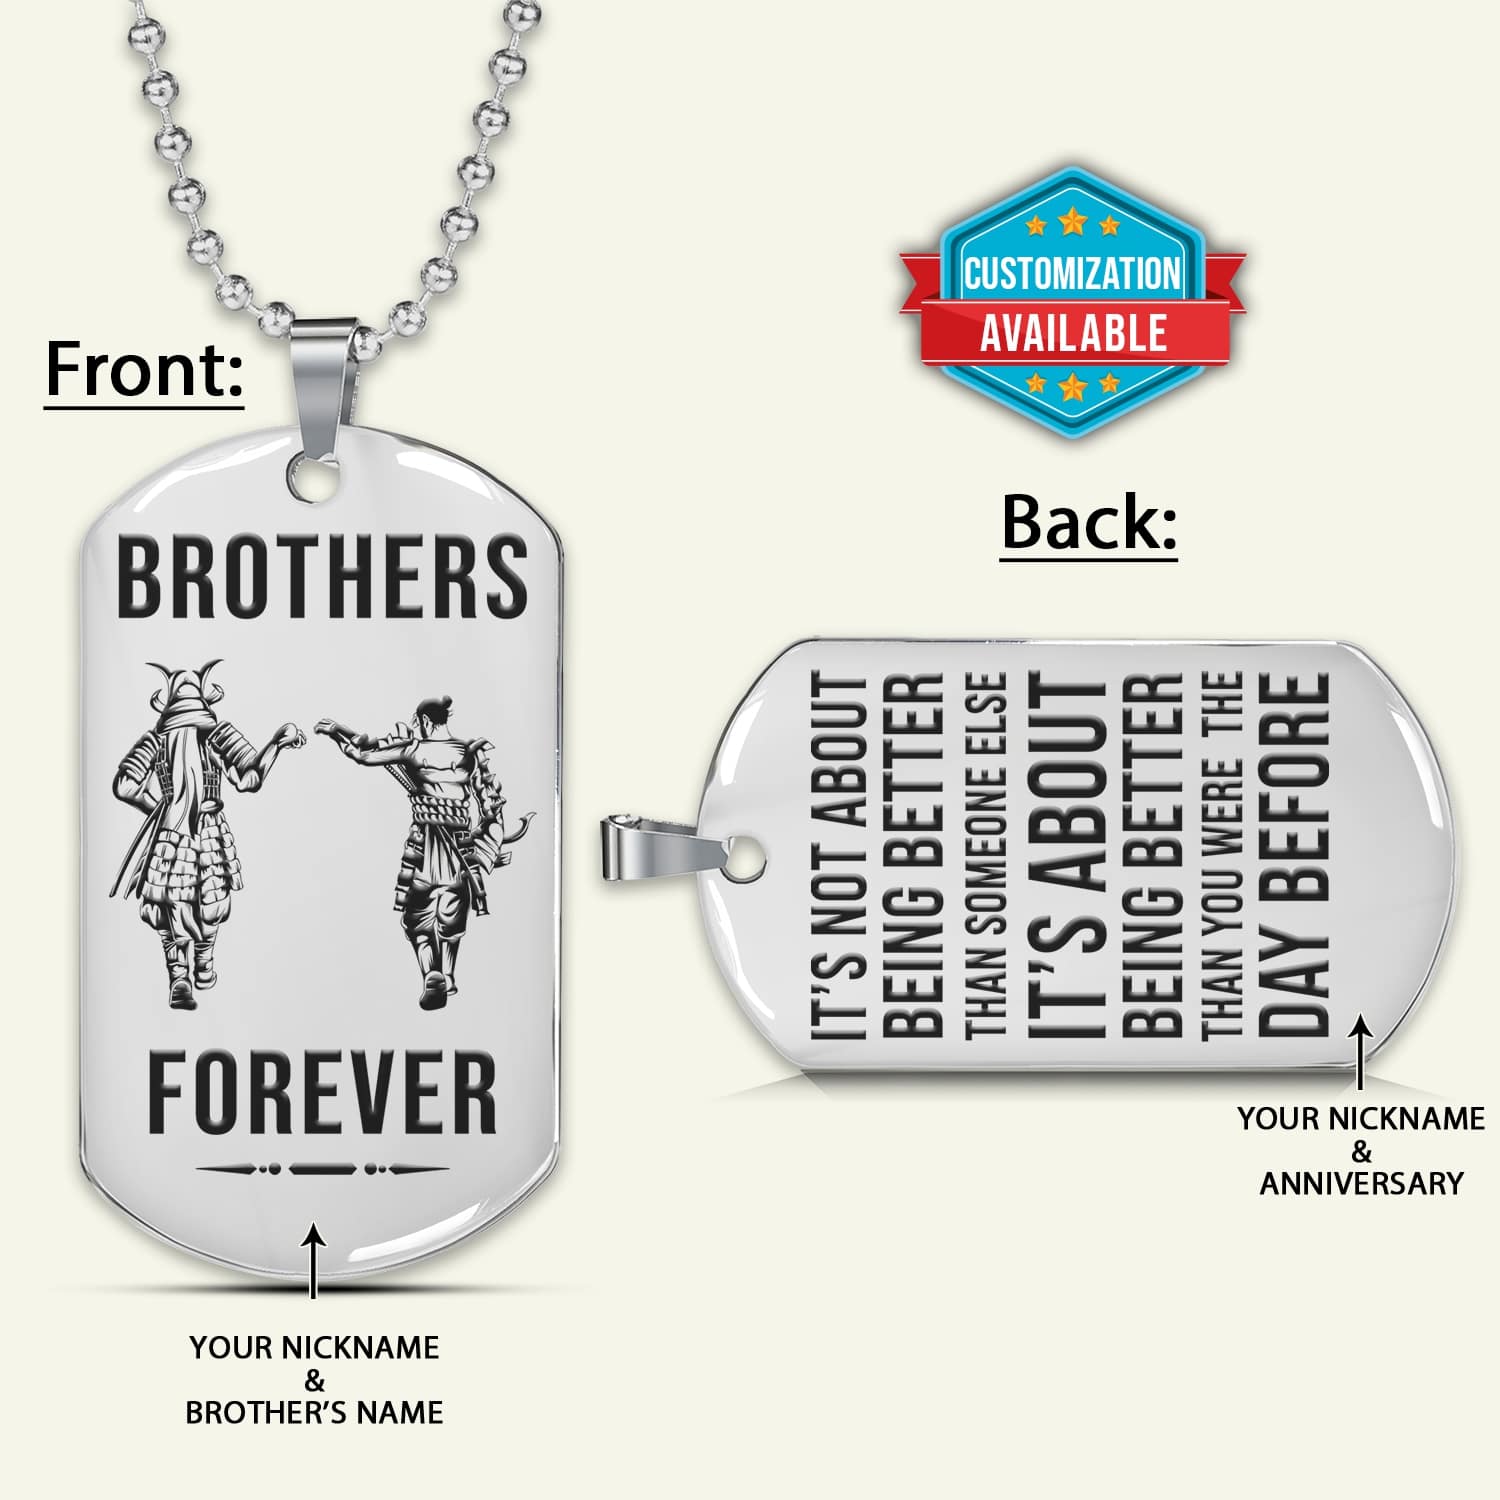 SAD056 - Brothers Forever - It's About Being Better Than You Were The Day Before - Samurai - Bushido - Katana - Ronin - Miyamoto Musashi - Silver Double-Sided Dog Tag